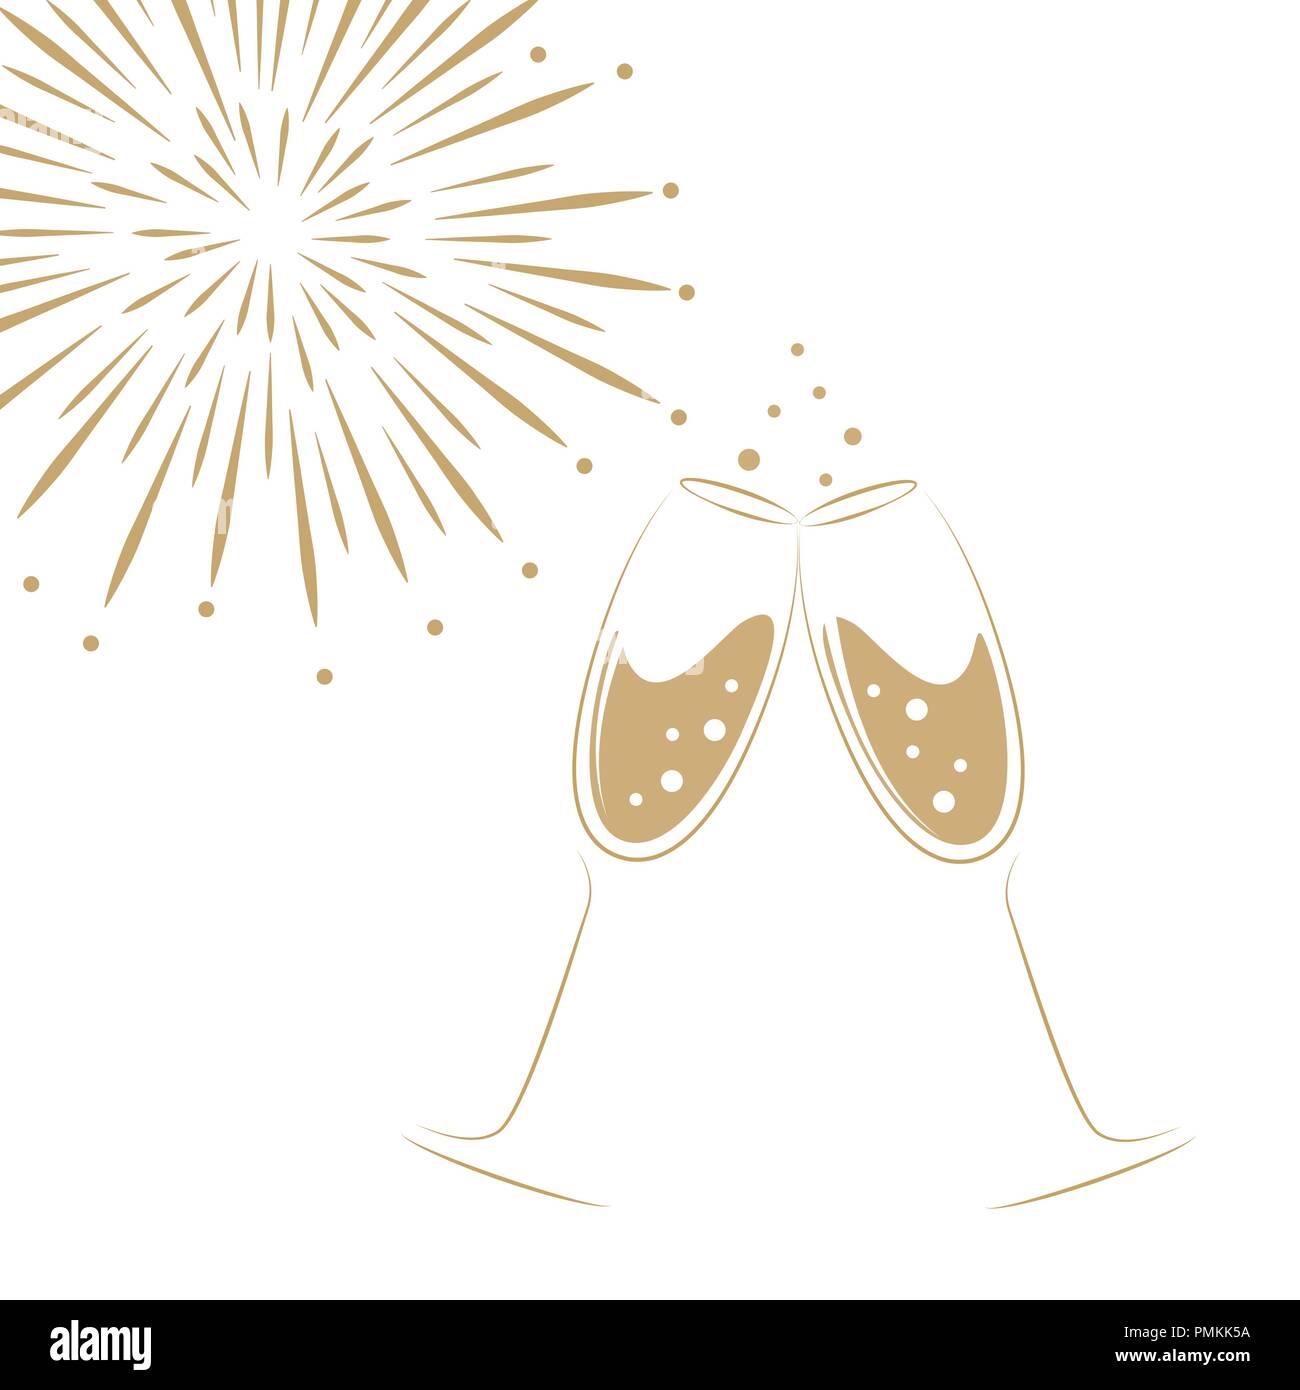 two champagne glasses and fireworks on a white background vector illustration EPS10 Stock Vector